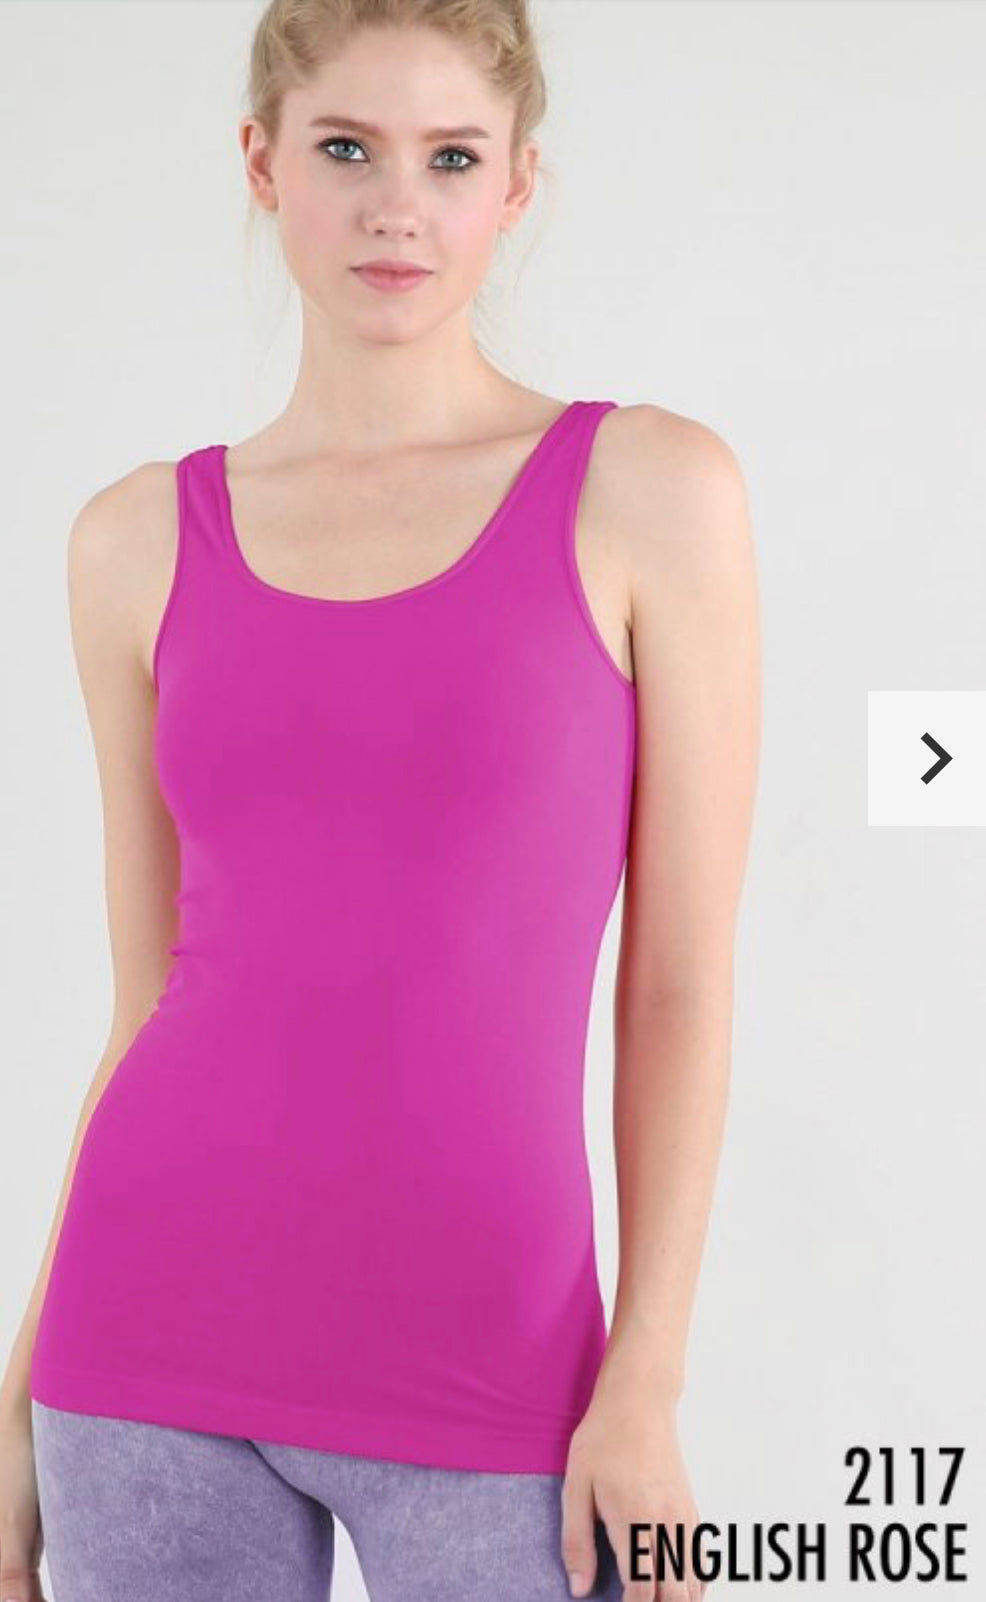 RESTOCKED AGAIN...TOP SELLER! Niki Biki stretch smooth tanks, great for layering, ASSORTED STYLES/COLORS